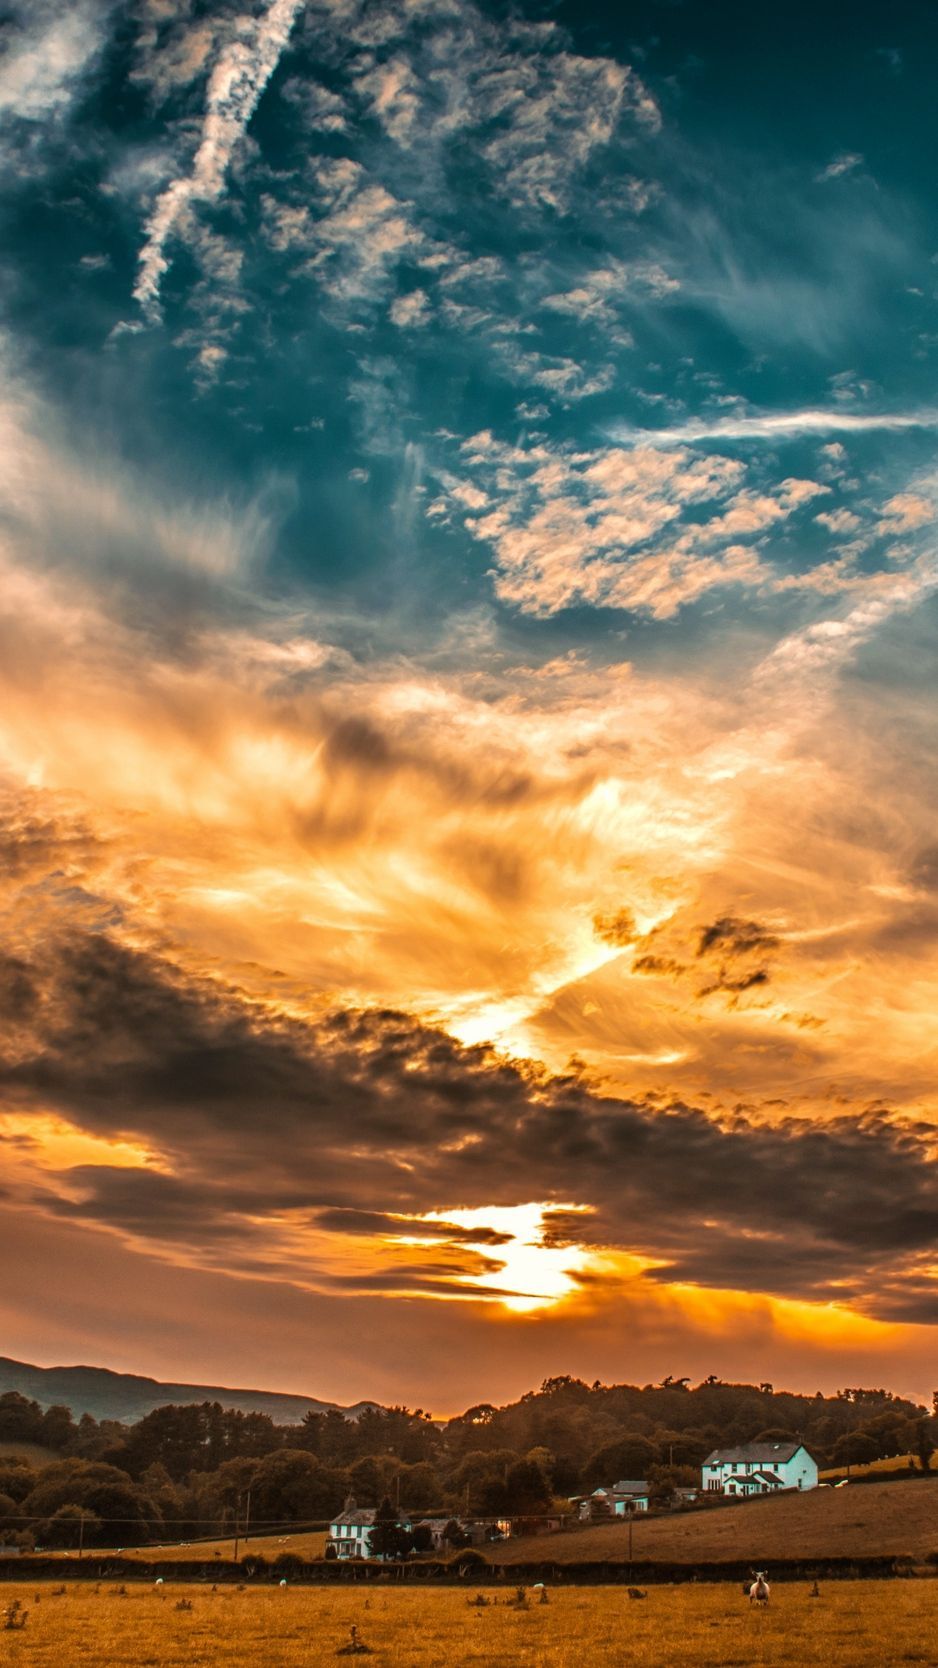 The Most Beautiful Sunsets In The World. Background cool 3. Sunset sky, Clouds, Sky and clouds